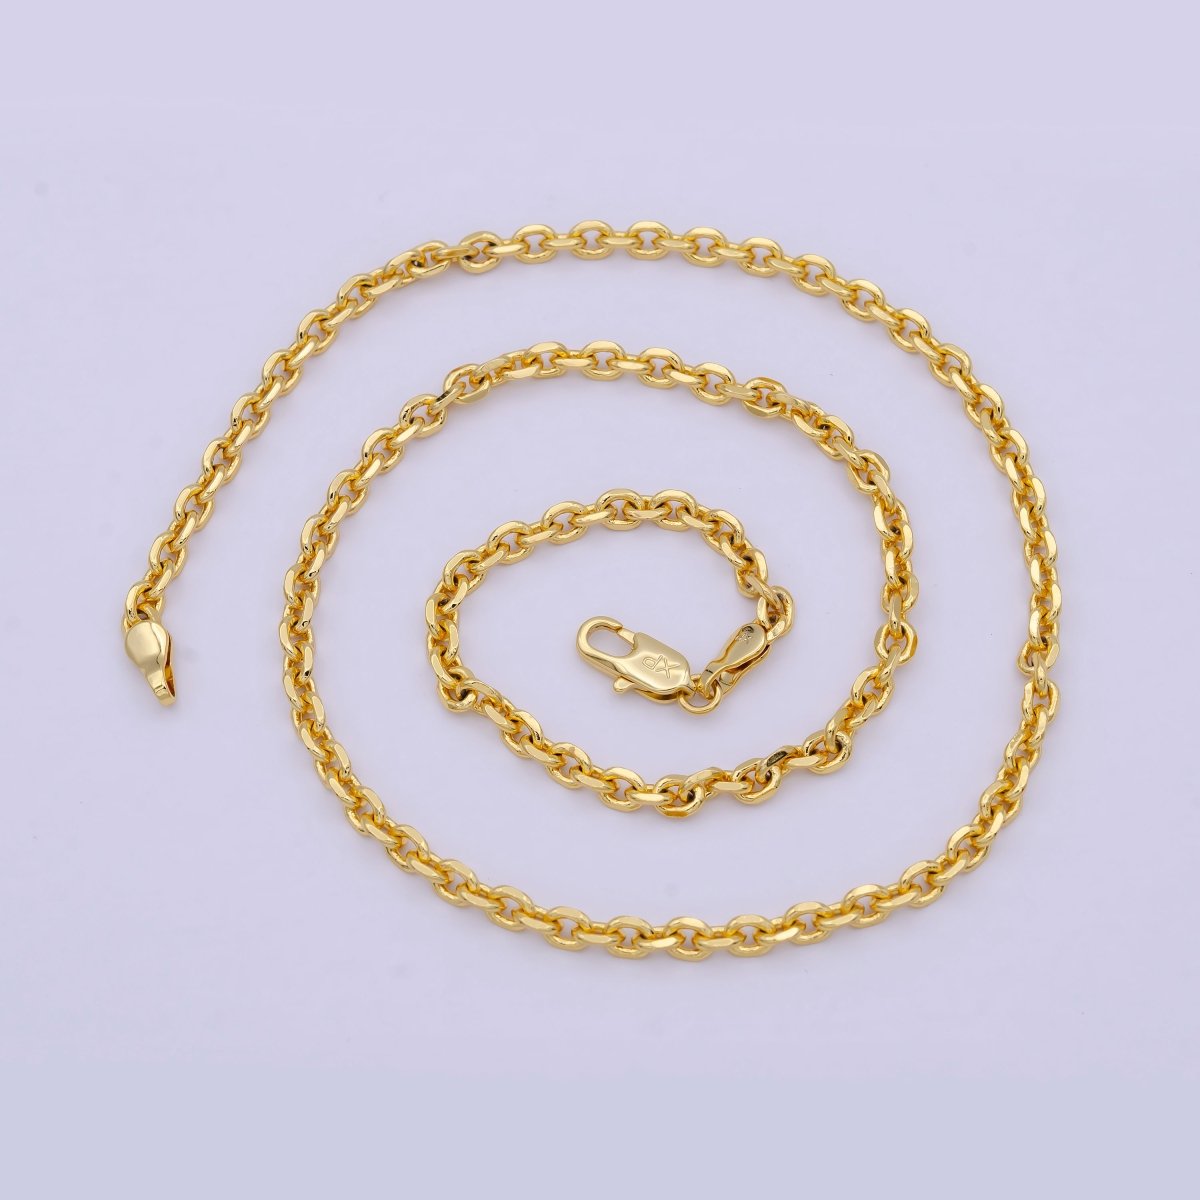 Cable Chain necklace, 24k gold filled chain Dainty gold filled chain, minimalist necklace 17.7 inch chain | WA-809 Clearance Pricing - DLUXCA